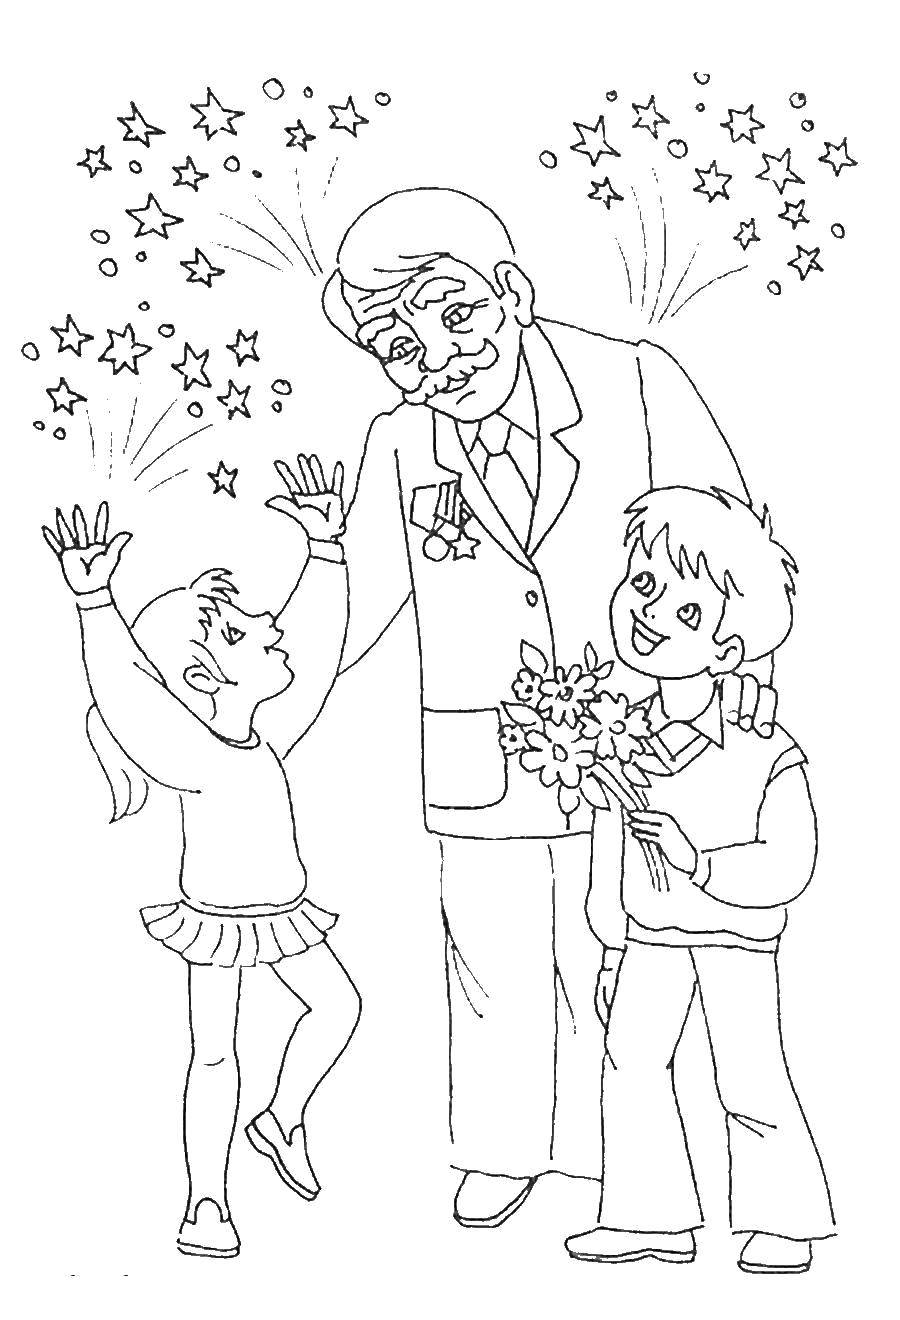 Coloring Congratulations grandpa on victory day. Category greeting cards. Tags:  Greeting, may 9, Victory Day.